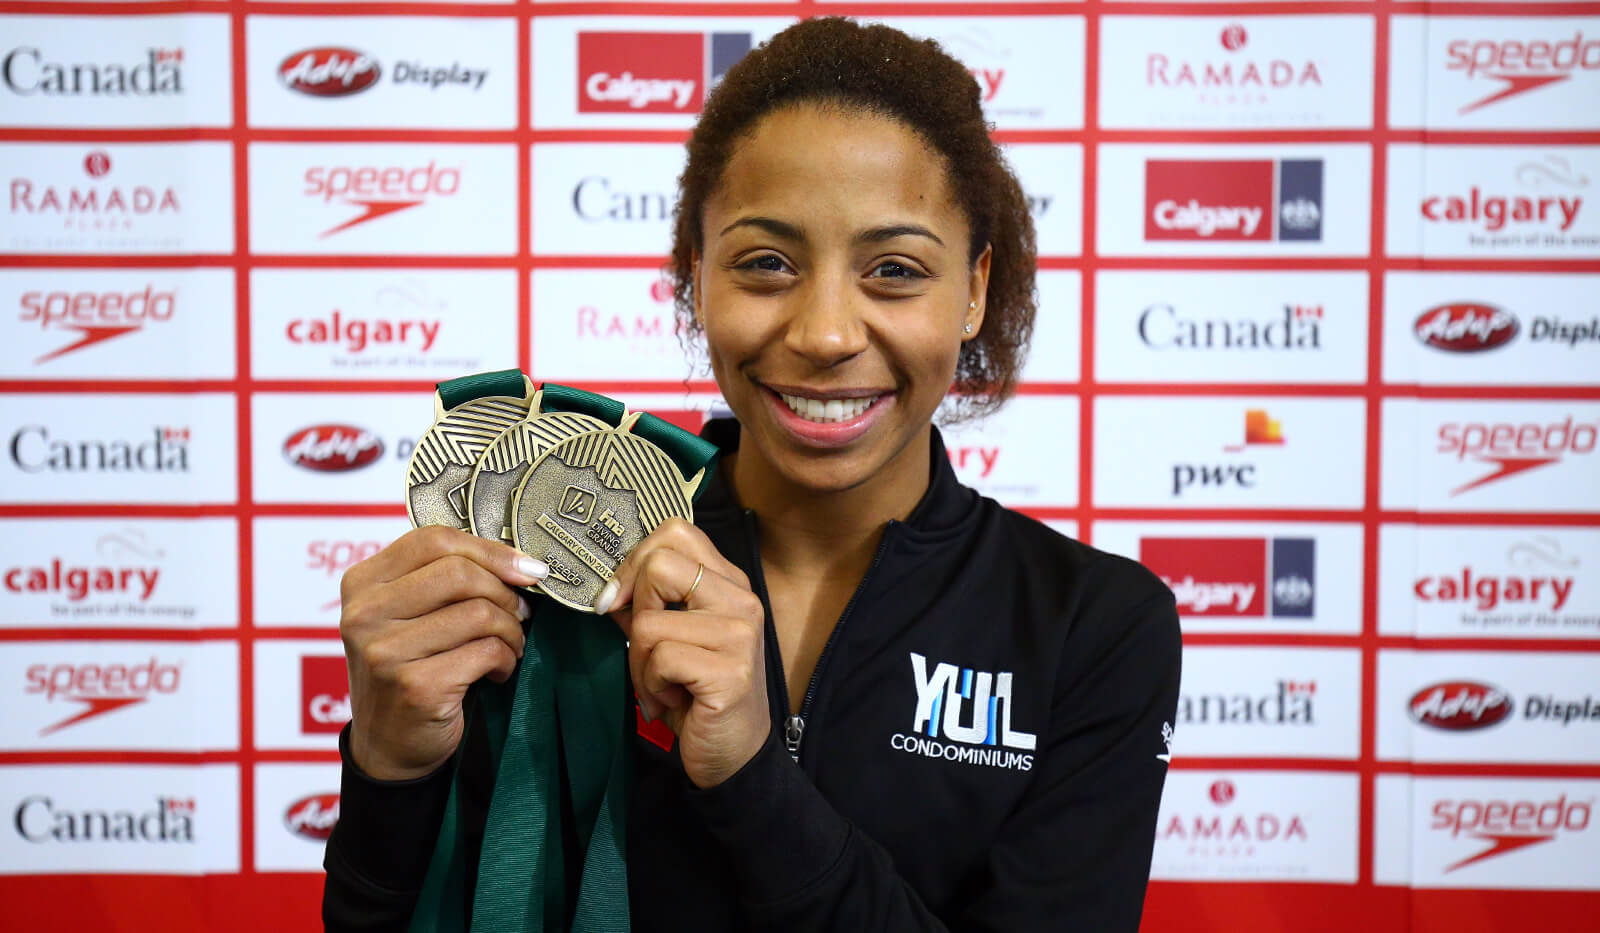 Calgary: five more medals to close out the Canada Cup